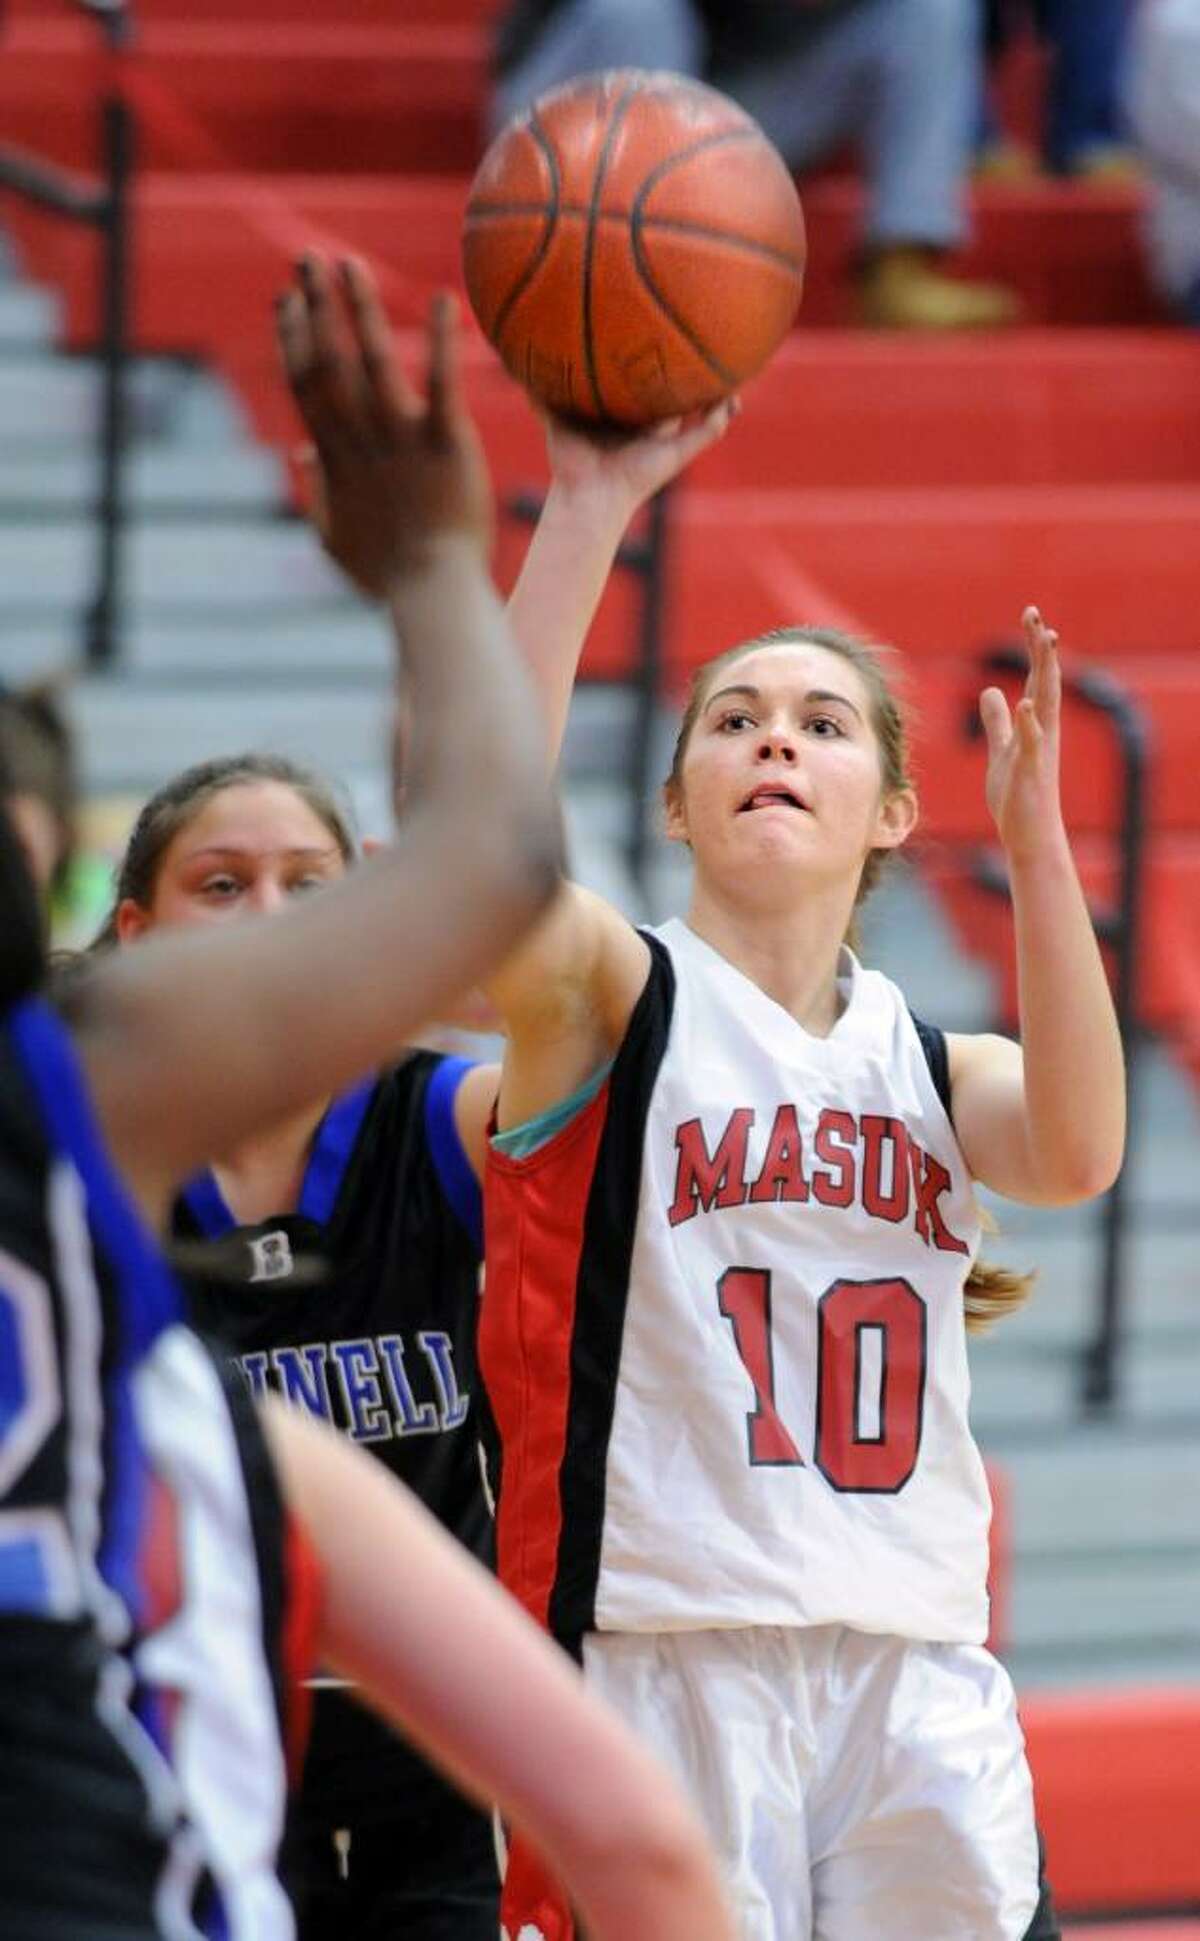 Masuk's Colleen Courbron puts up the ball during the first half of game action against Bunnell Wednesday Feb. 17, 2010 at Masuk.